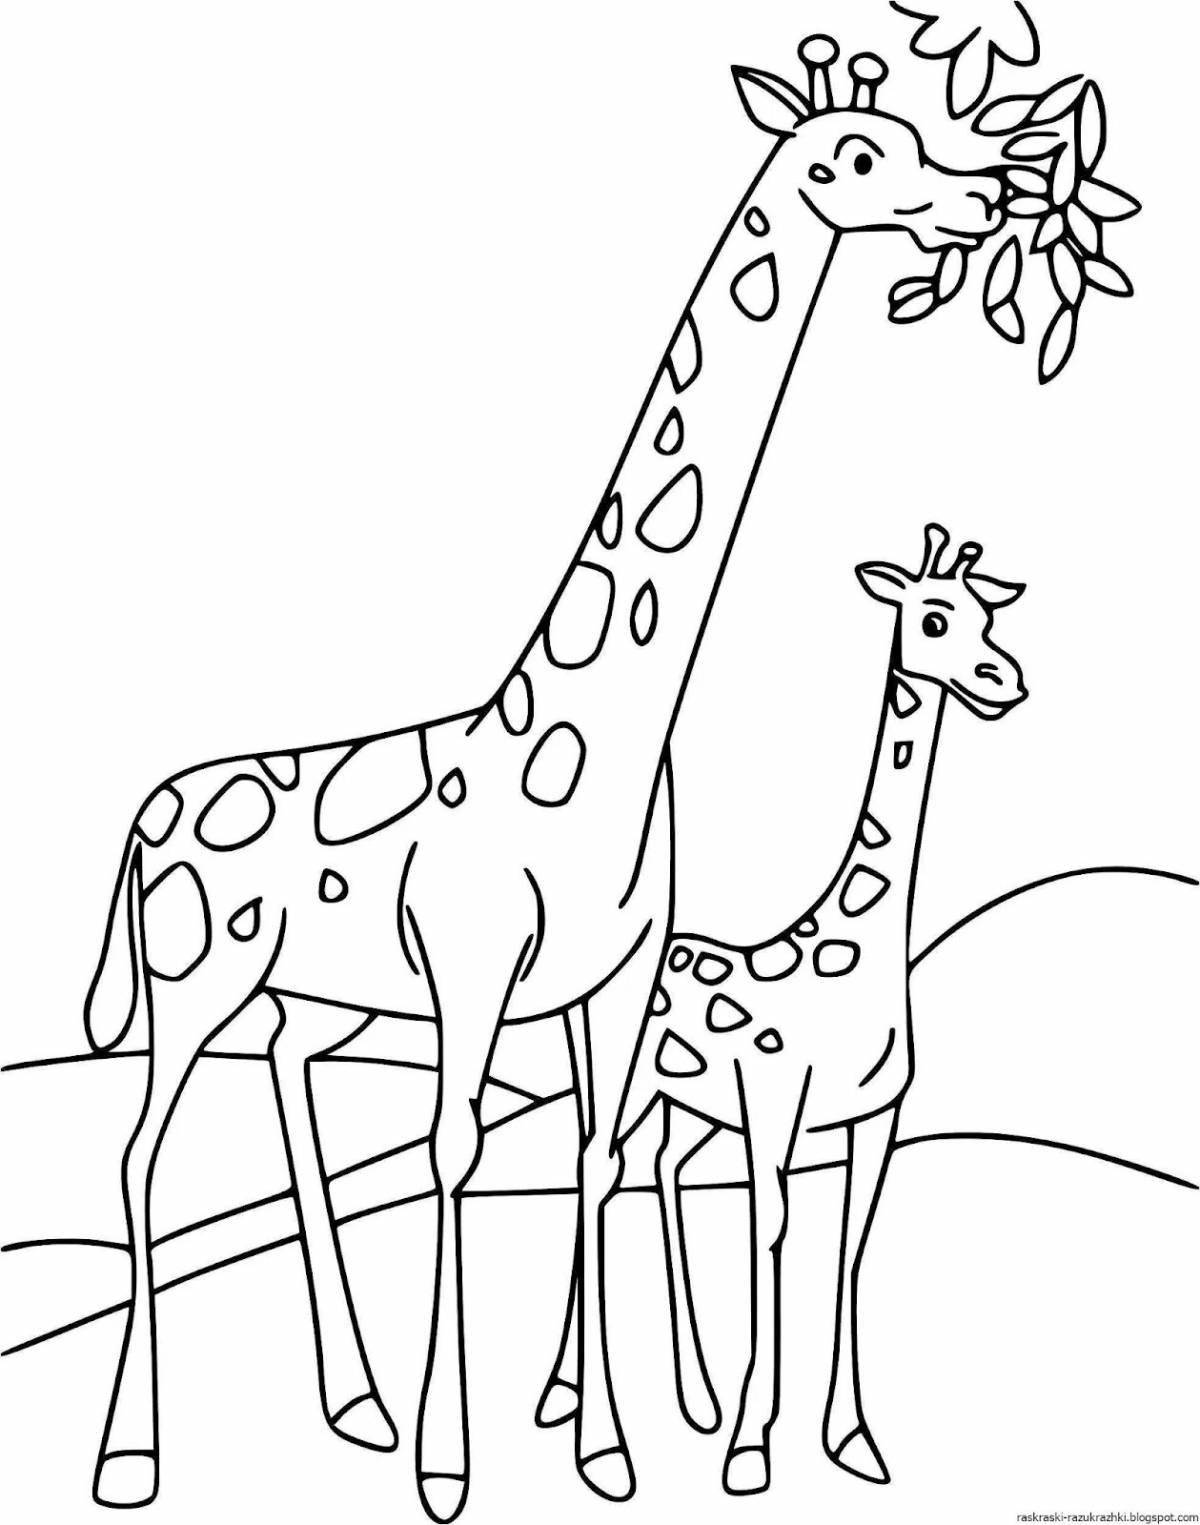 Colorful giraffe coloring book for kids